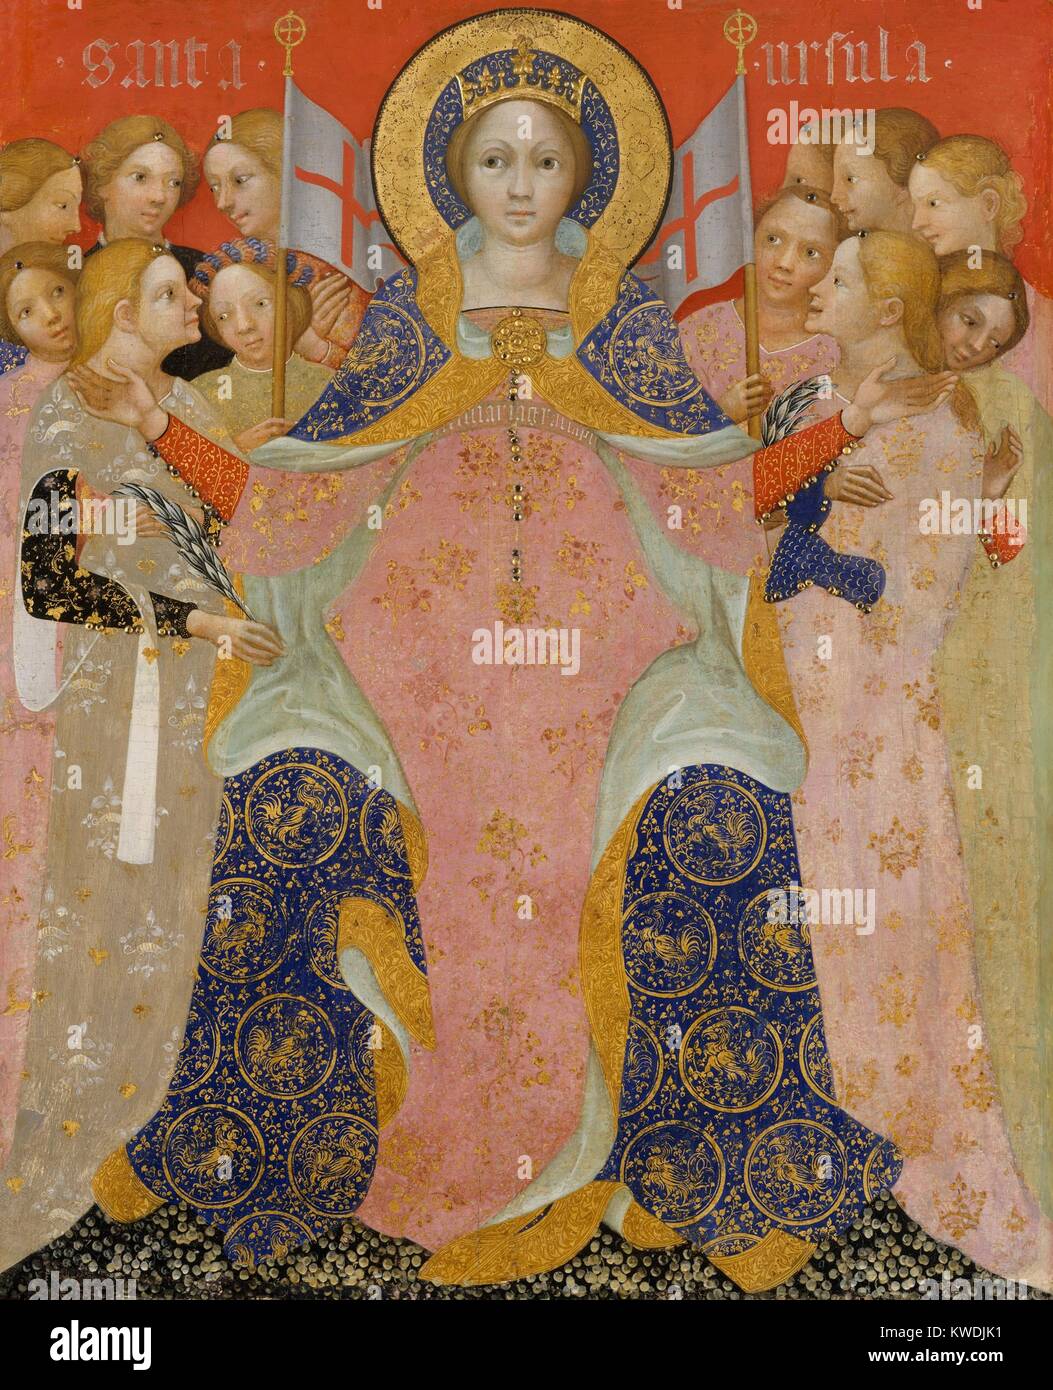 SAINT URSULLA AND HER MAIDENS, by Niccolo di Pietro, 1410, Italian Renaissance painting. Saint Ursula is shown with some of the eleven thousand virgins with whom she is said to have been martyred by the Huns around 383 A.D. The flat patterns of the garments play against the sculptural volume of the womens heads and hands (BSLOC 2017 16 60) Stock Photo